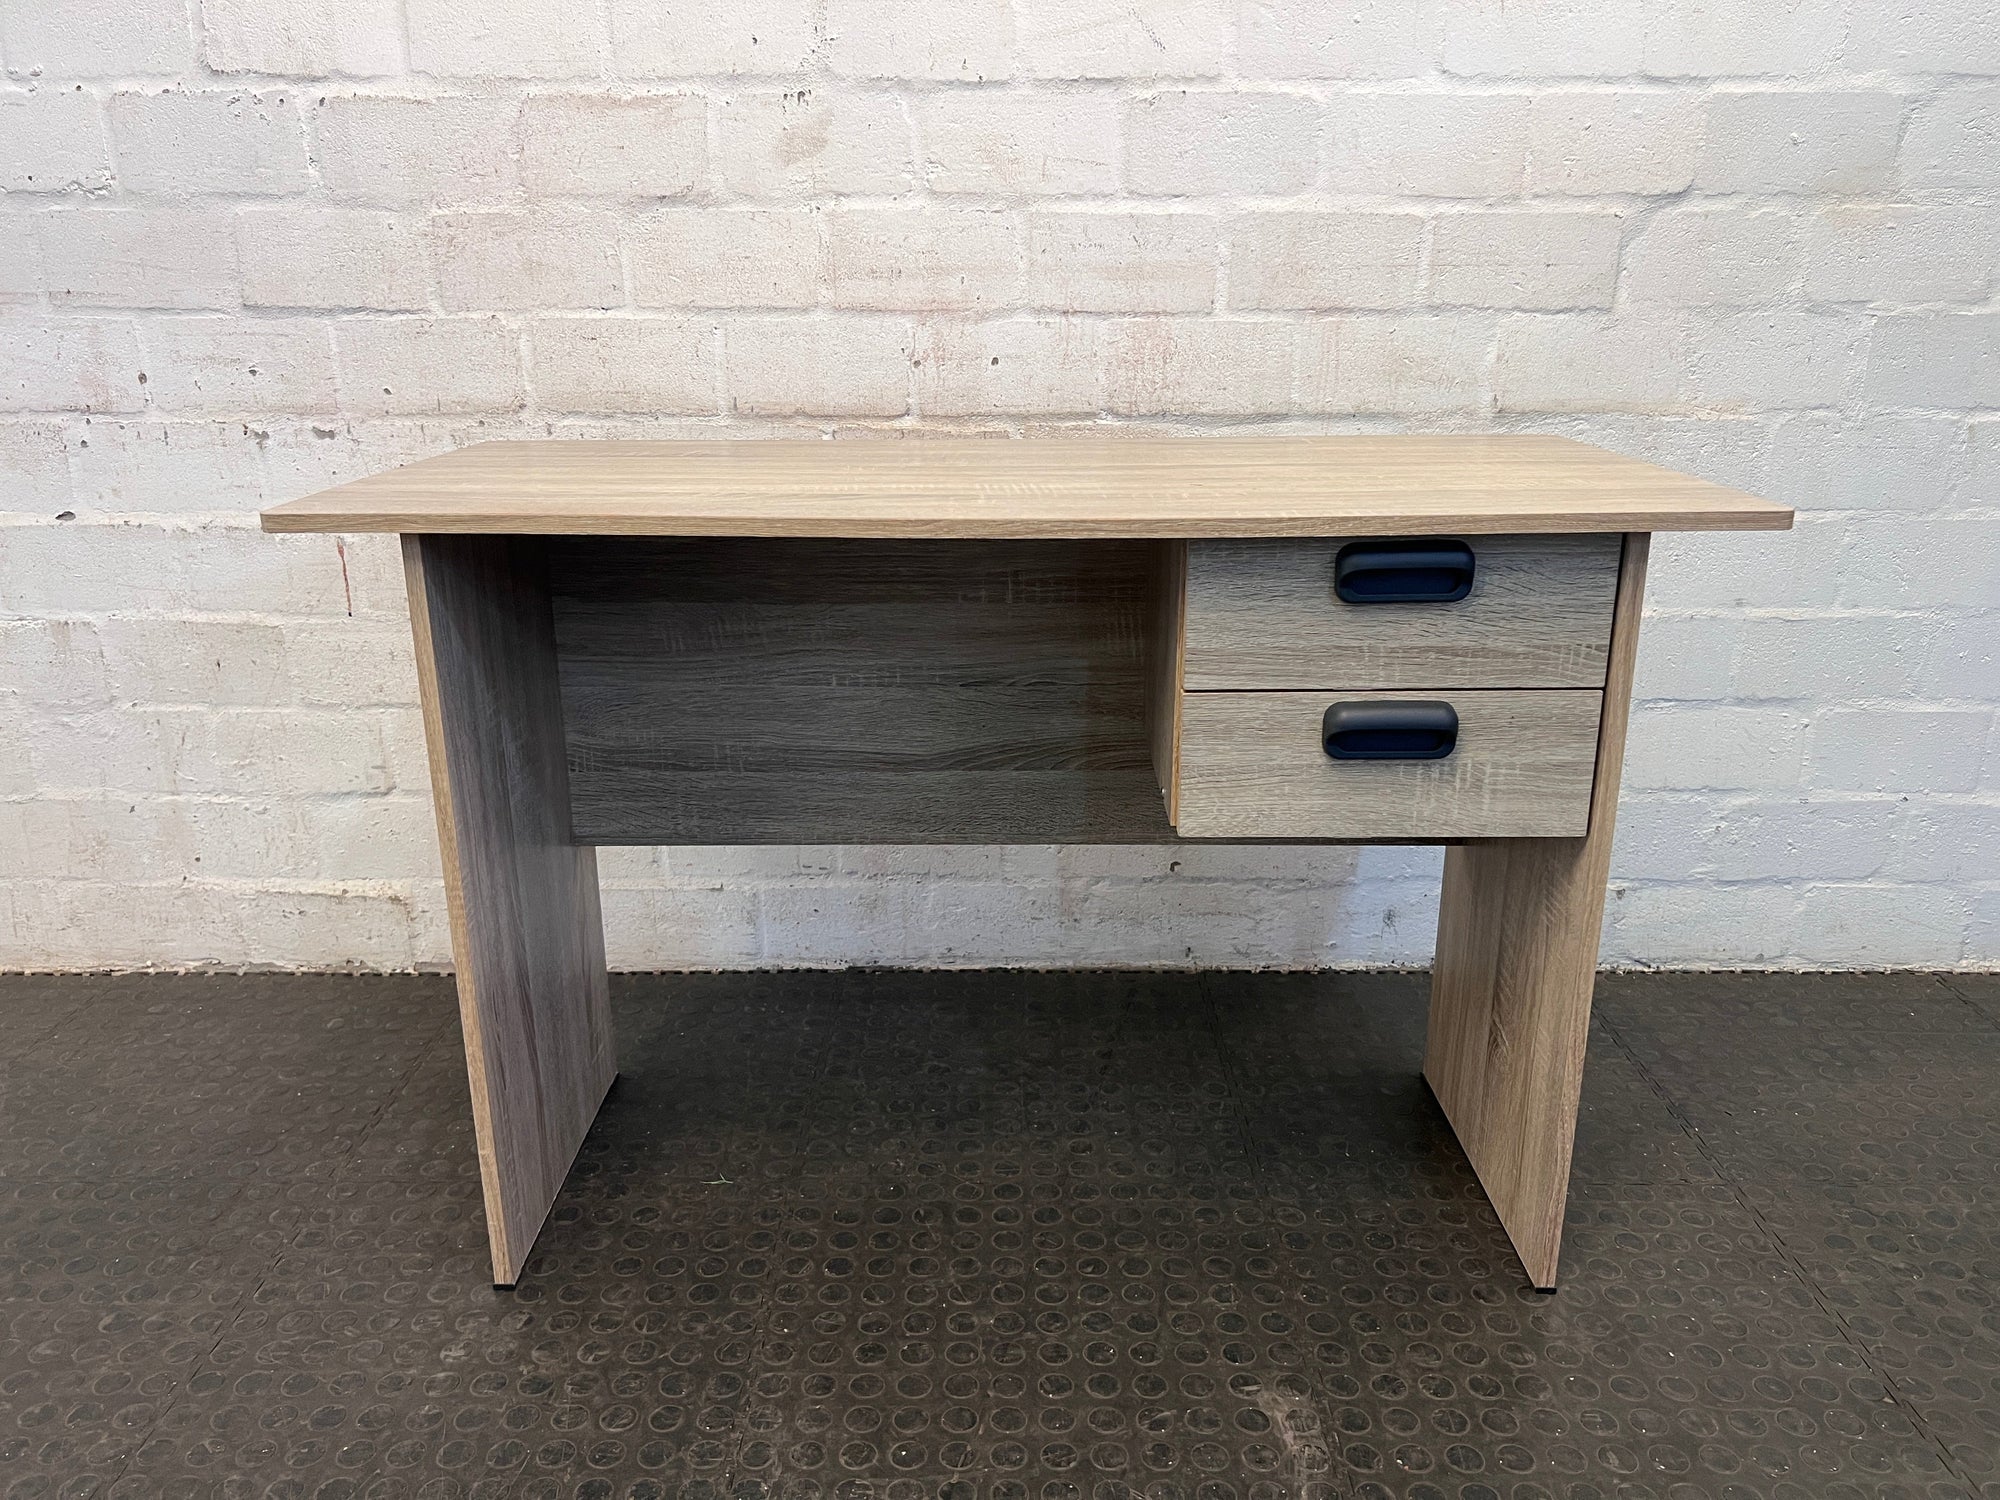 Simple Two Drawer Office Desk